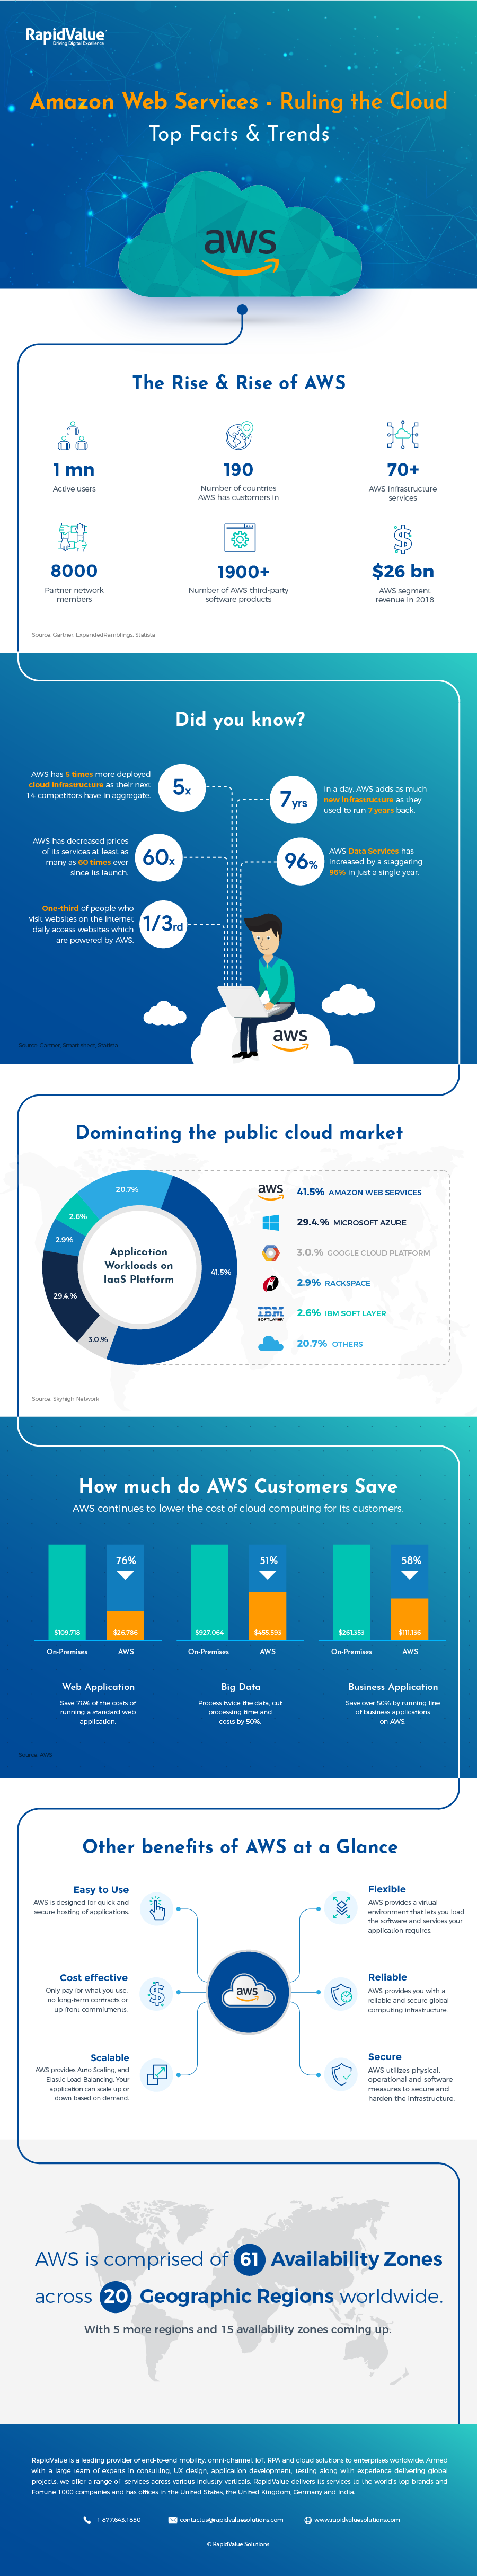 Amazon Web Services – Ruling the Cloud #nfographic